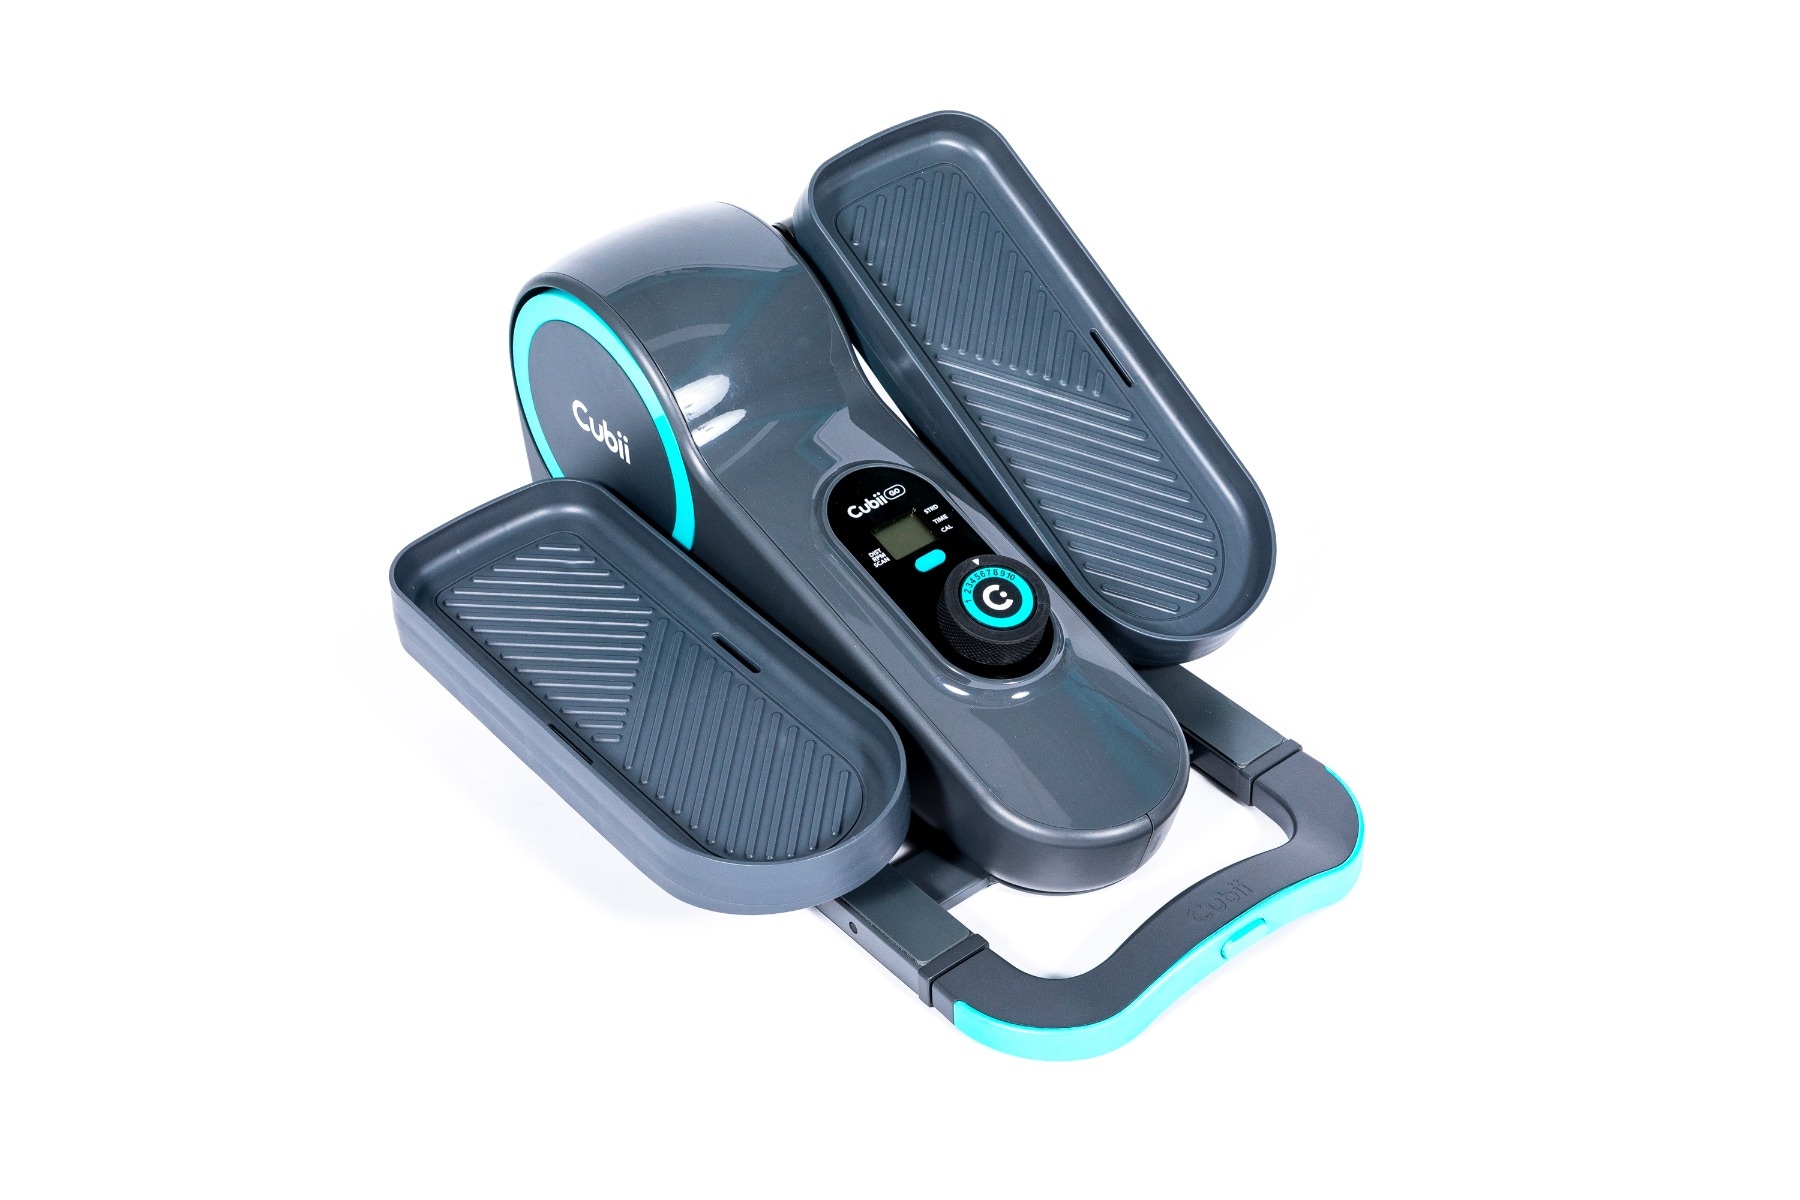 Cubii Go Elliptical From The Side